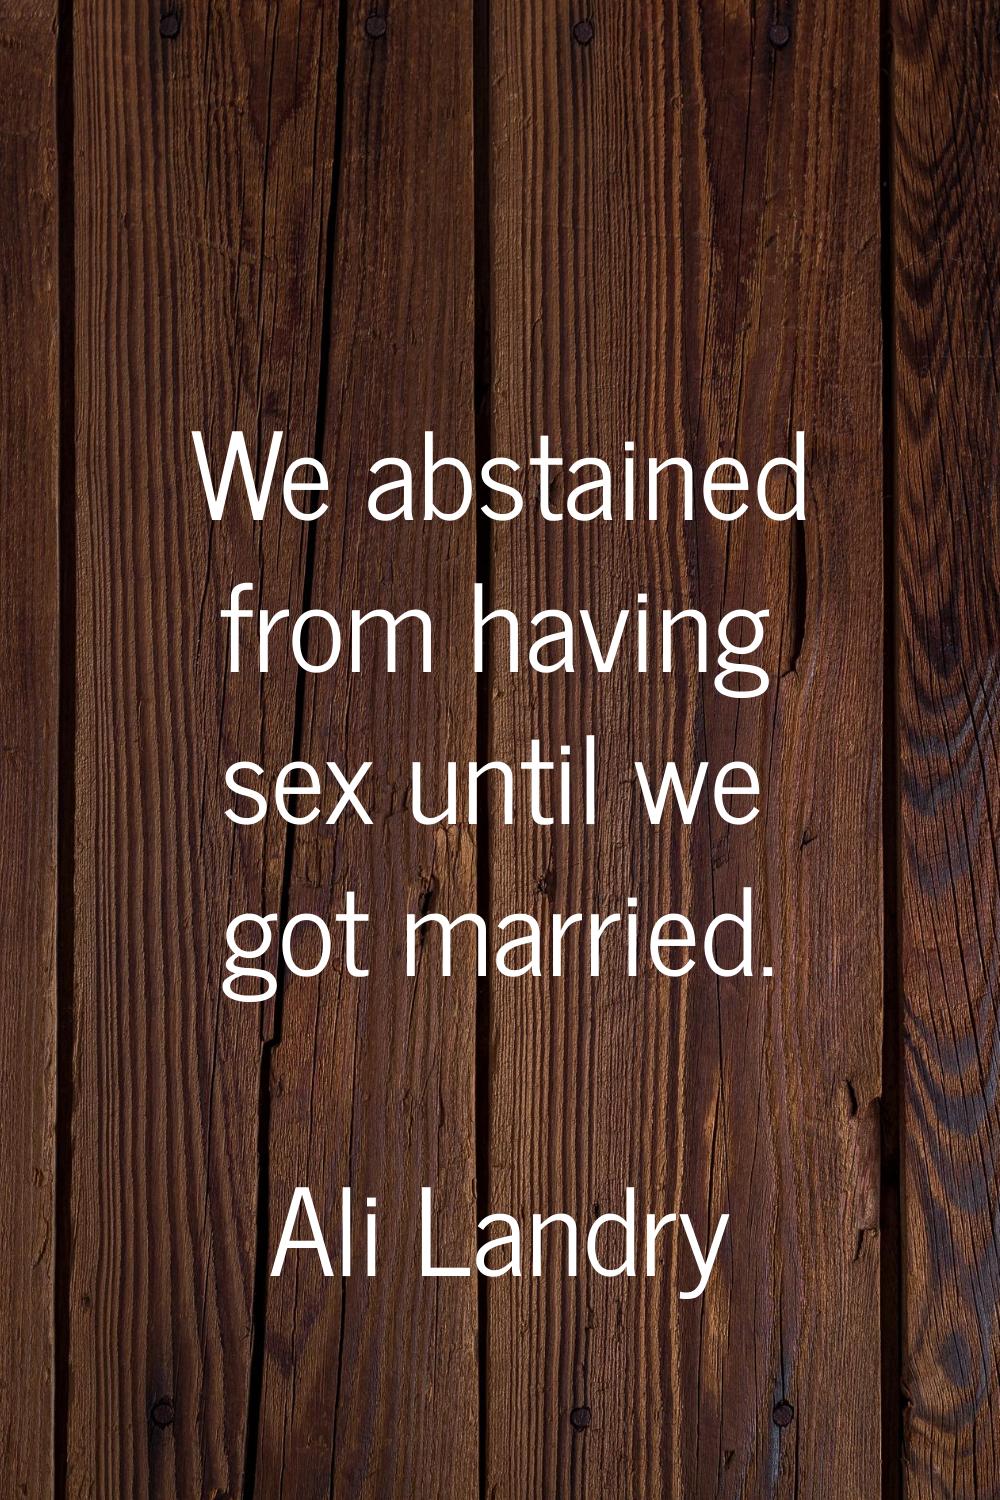 We abstained from having sex until we got married.